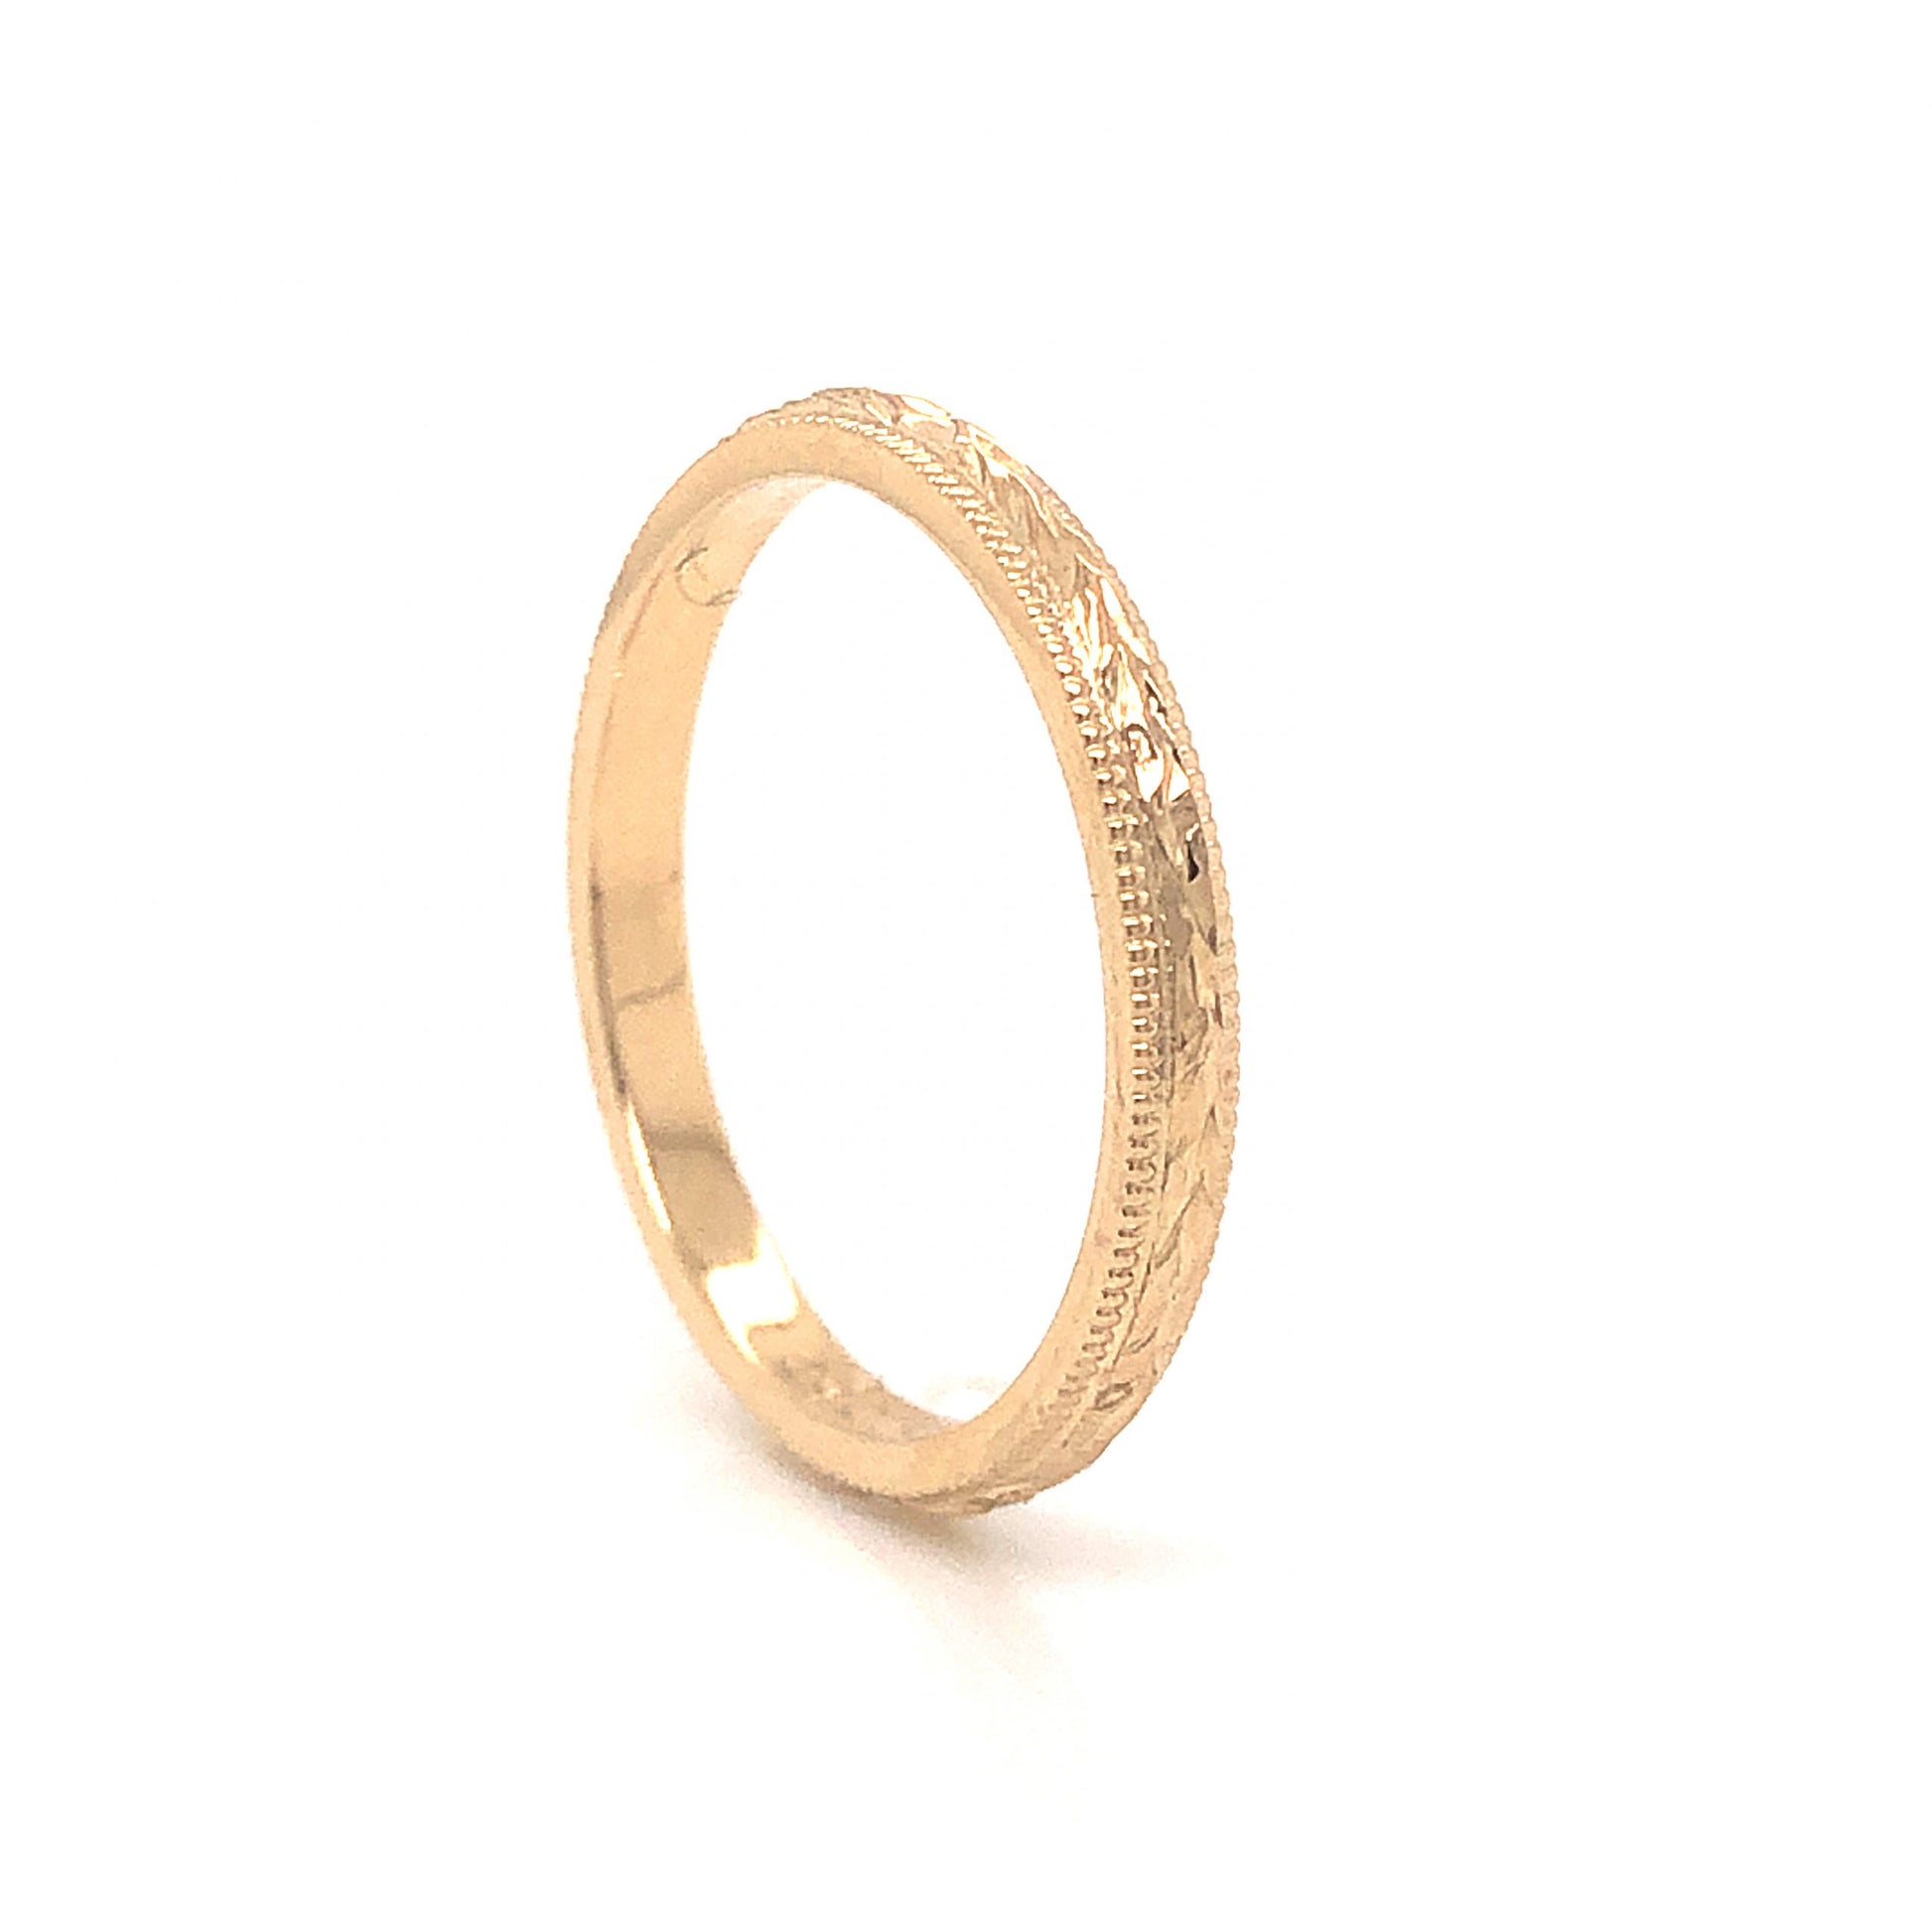 Vintage Inspired Engraved Wedding Band in 14k Yellow GoldComposition: 14 Karat Yellow GoldRing Size: 6Total Gram Weight: 1.8 gInscription: B&N 585